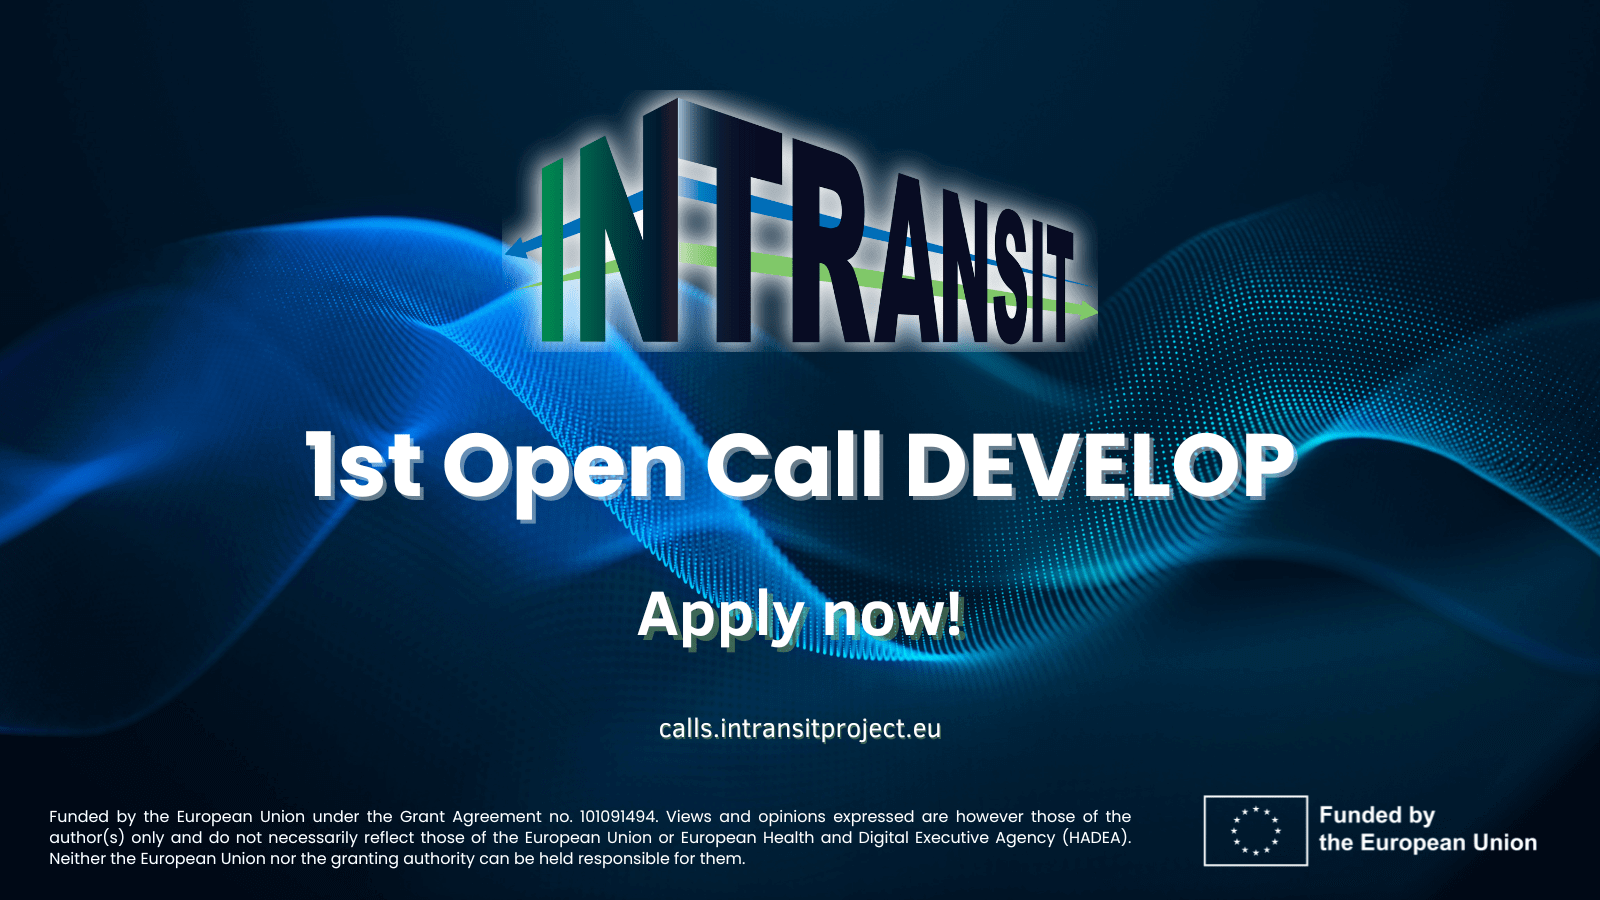 1st Open Call Innovate In Transit